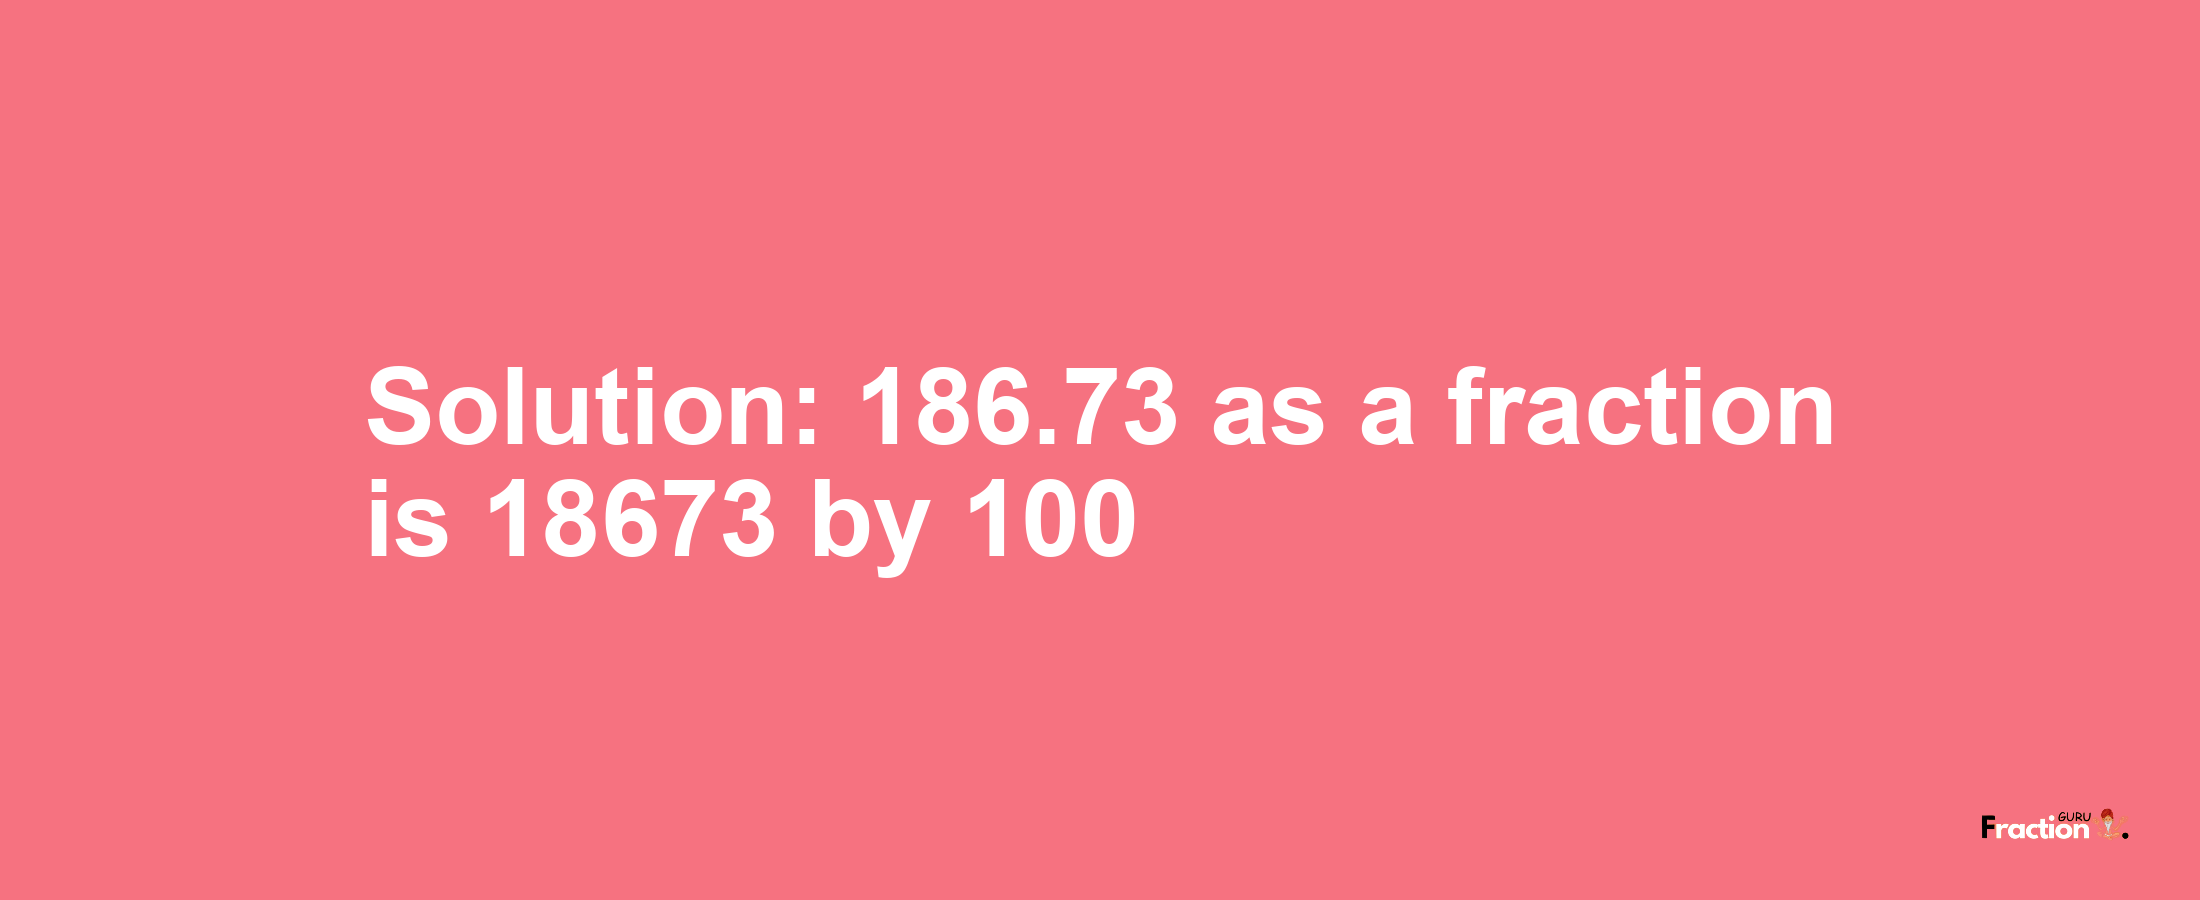 Solution:186.73 as a fraction is 18673/100